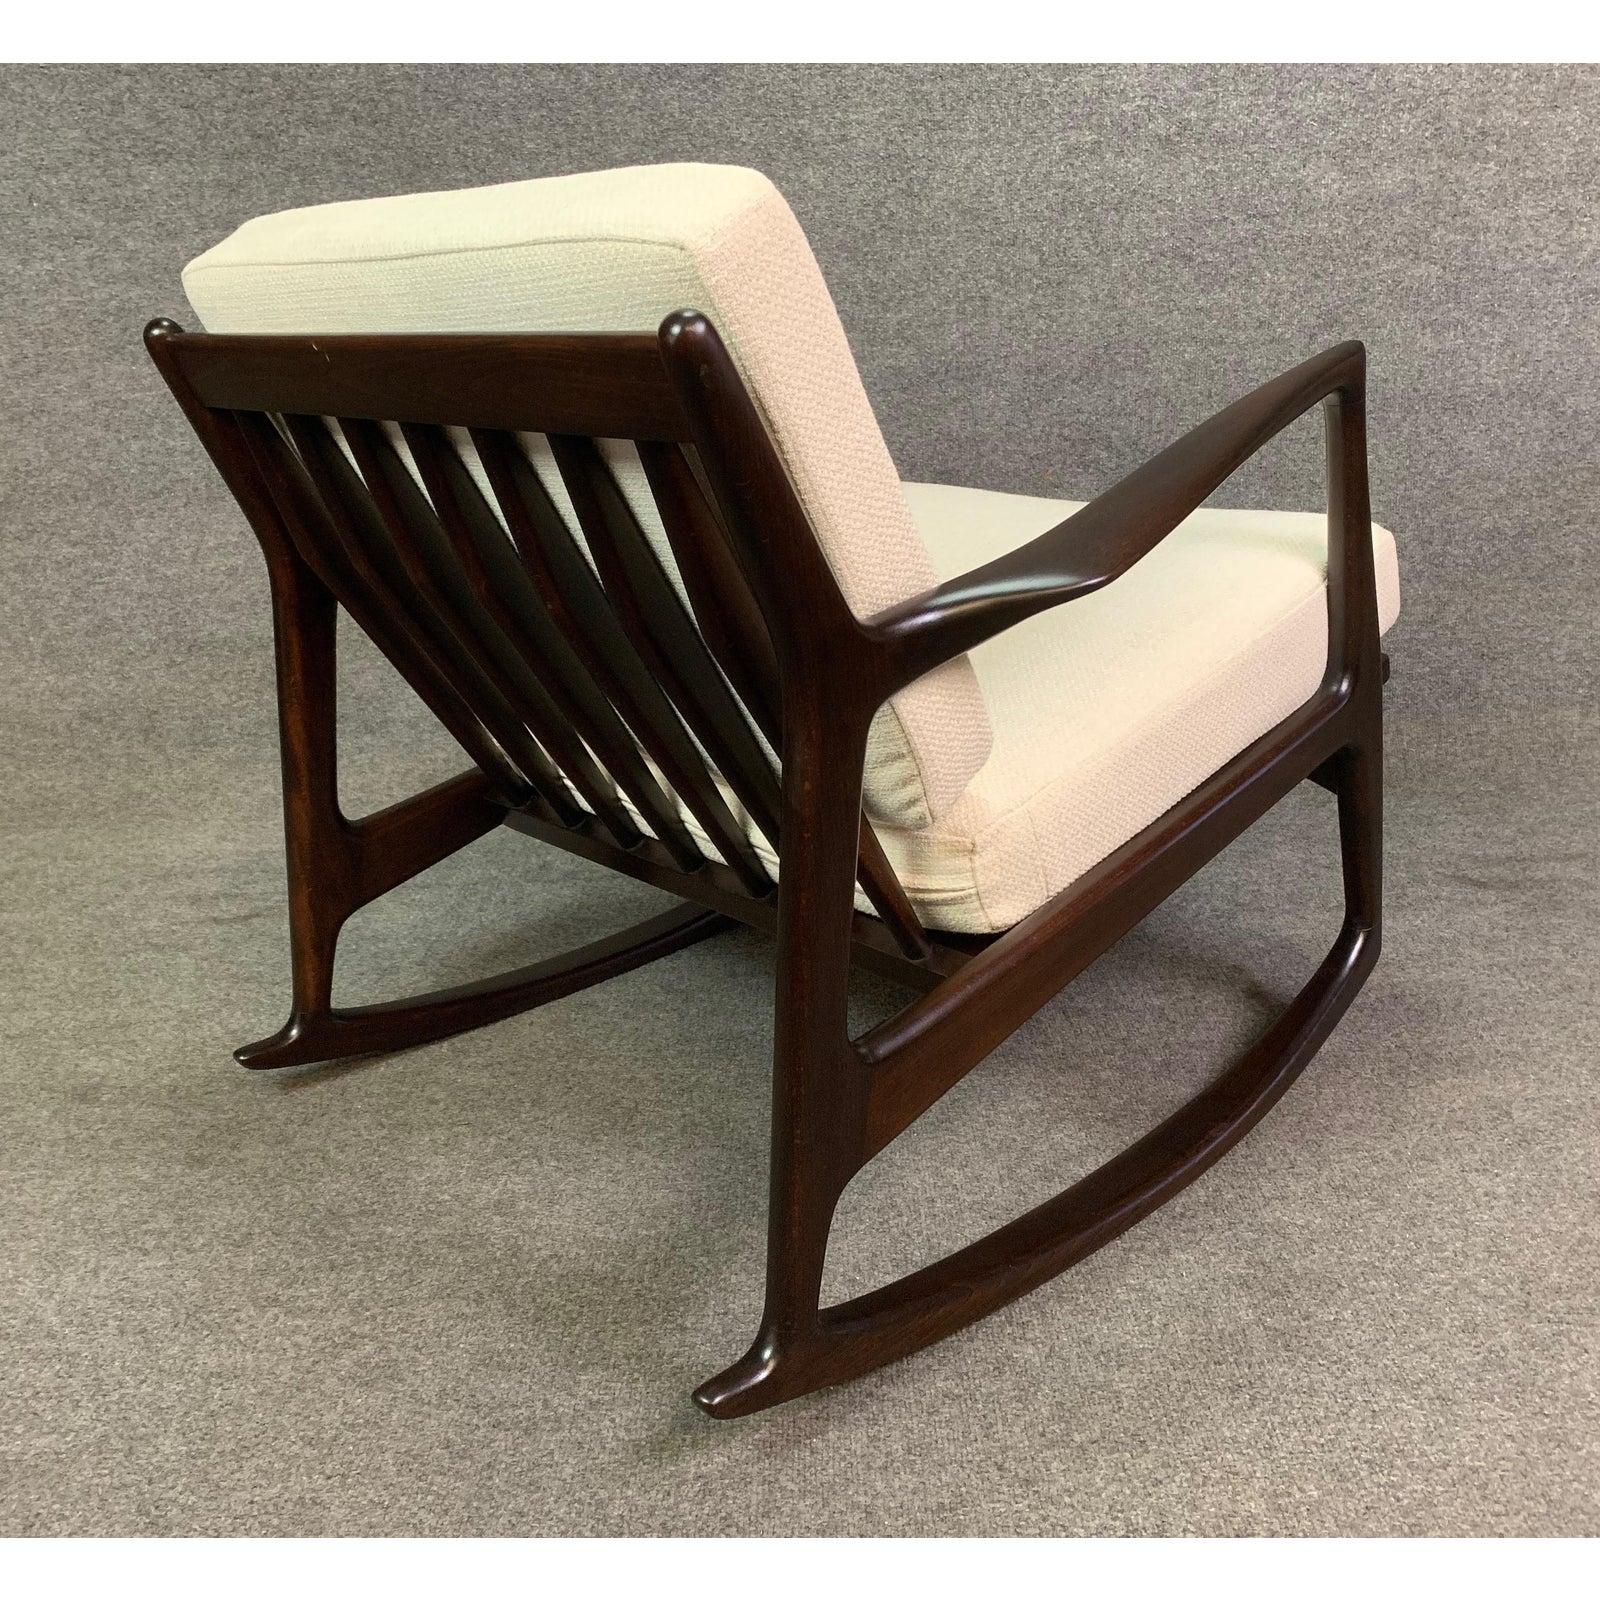 Vintage Danish Mid-Century Modern Rocking Chair by Kofod Larsen for Selig For Sale 2